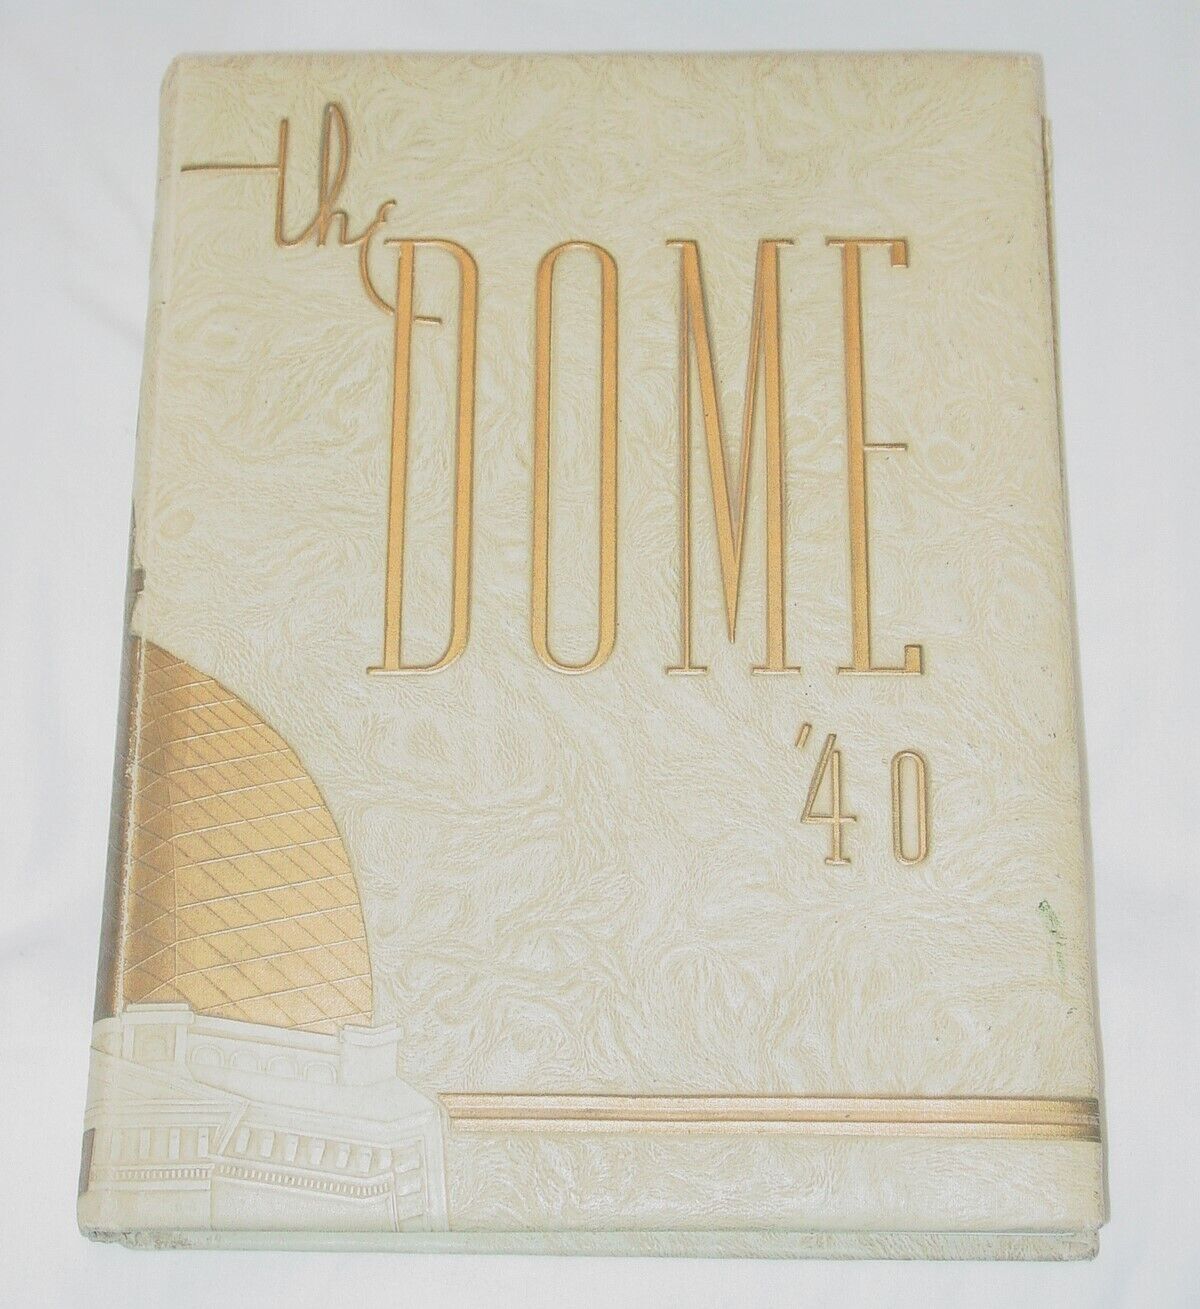 AWESOME 1940 NOTRE DAME YEARBOOK-THE DOME-COACH ELMER LAYDEN-FOOTBALL WENT 7-2